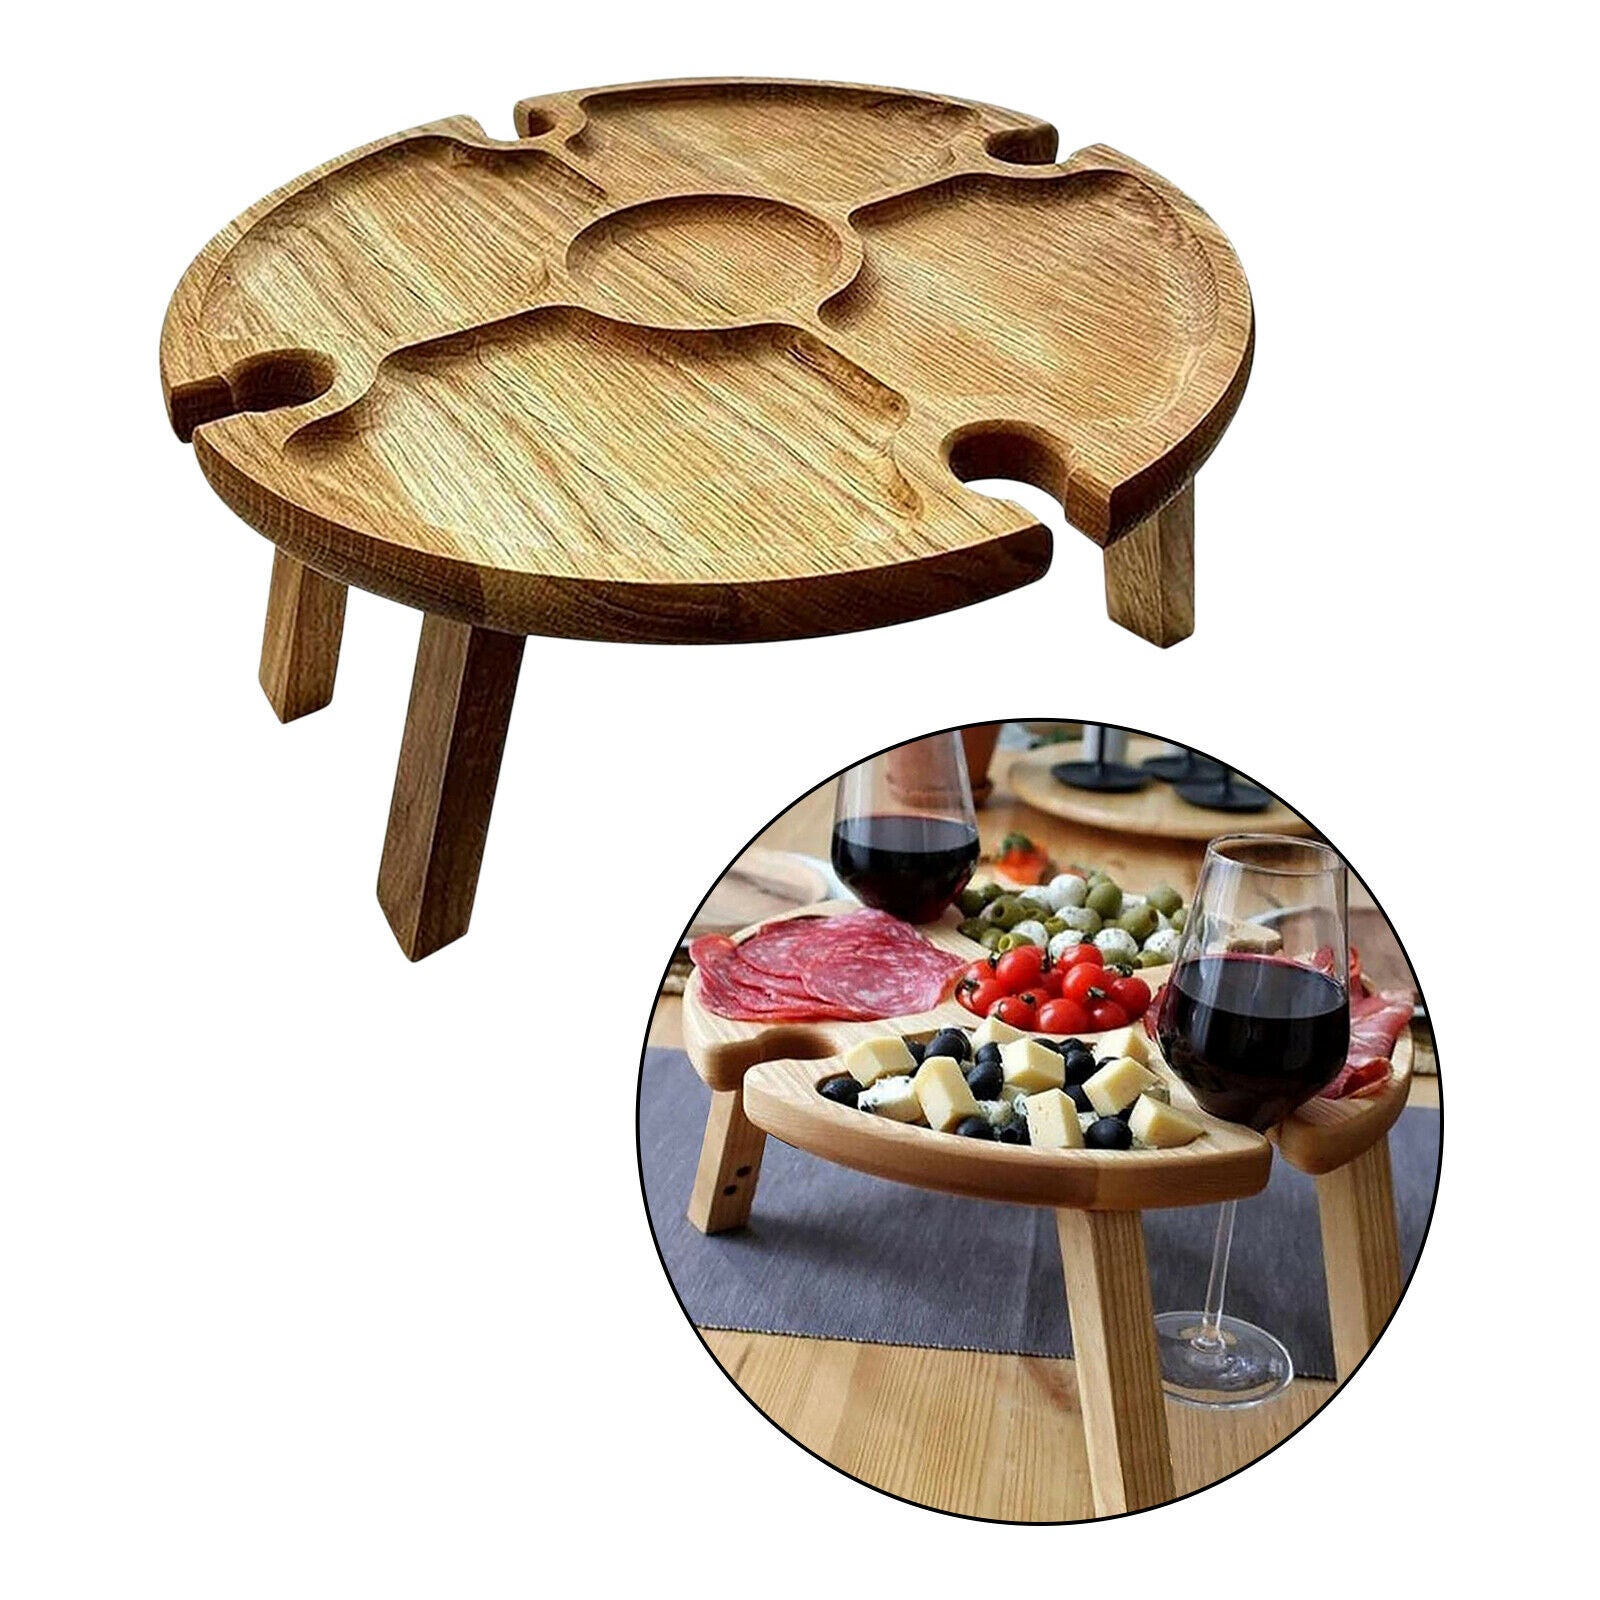 Outdoor Wooden Picnic Table with Glass Holder Wine Glass Rack for Garden